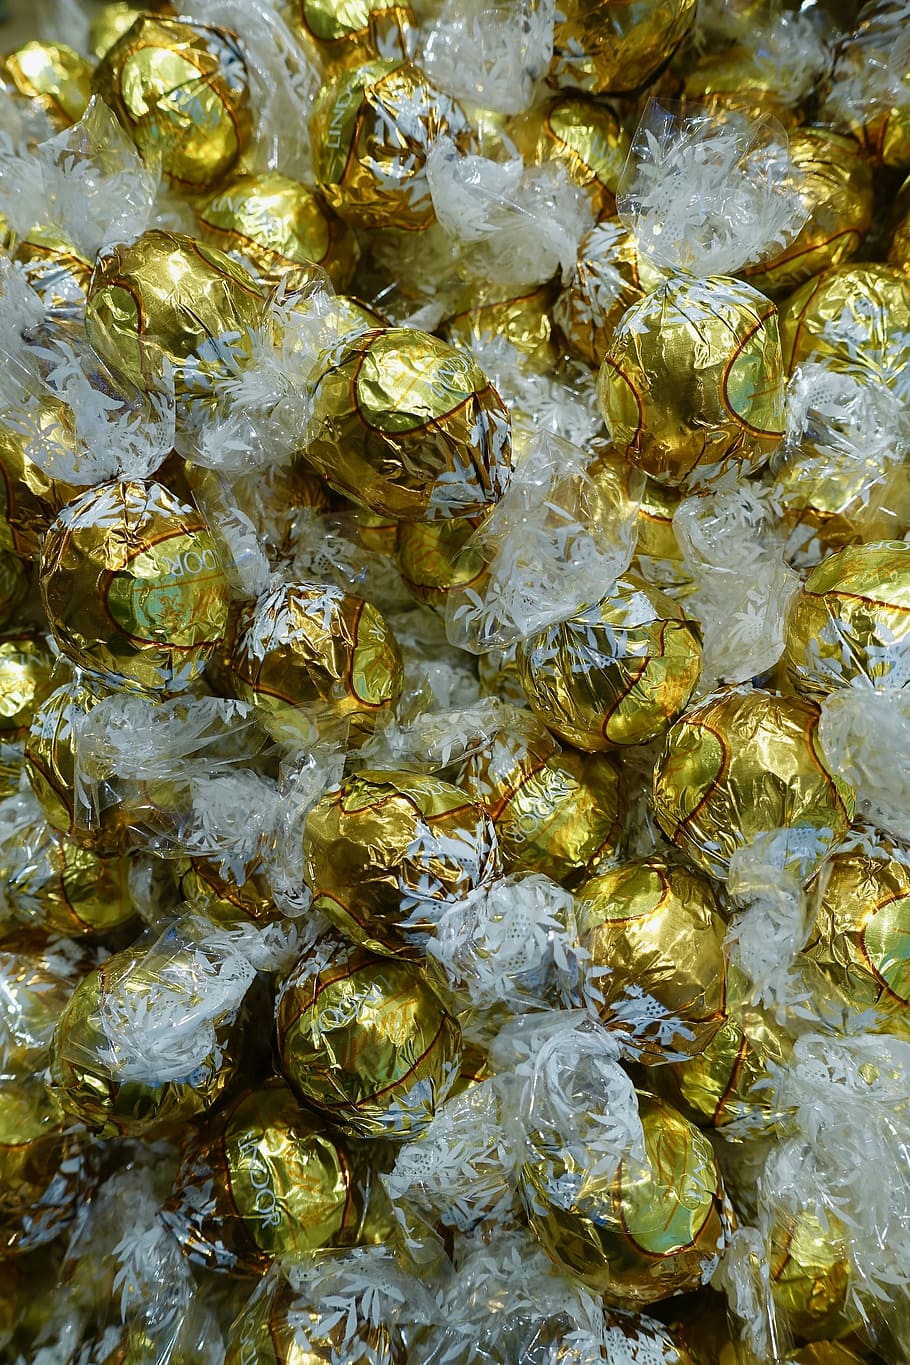 sweets, chocolate, candy, balls, wrapped, bonbon, confection, bright, yellow, full frame